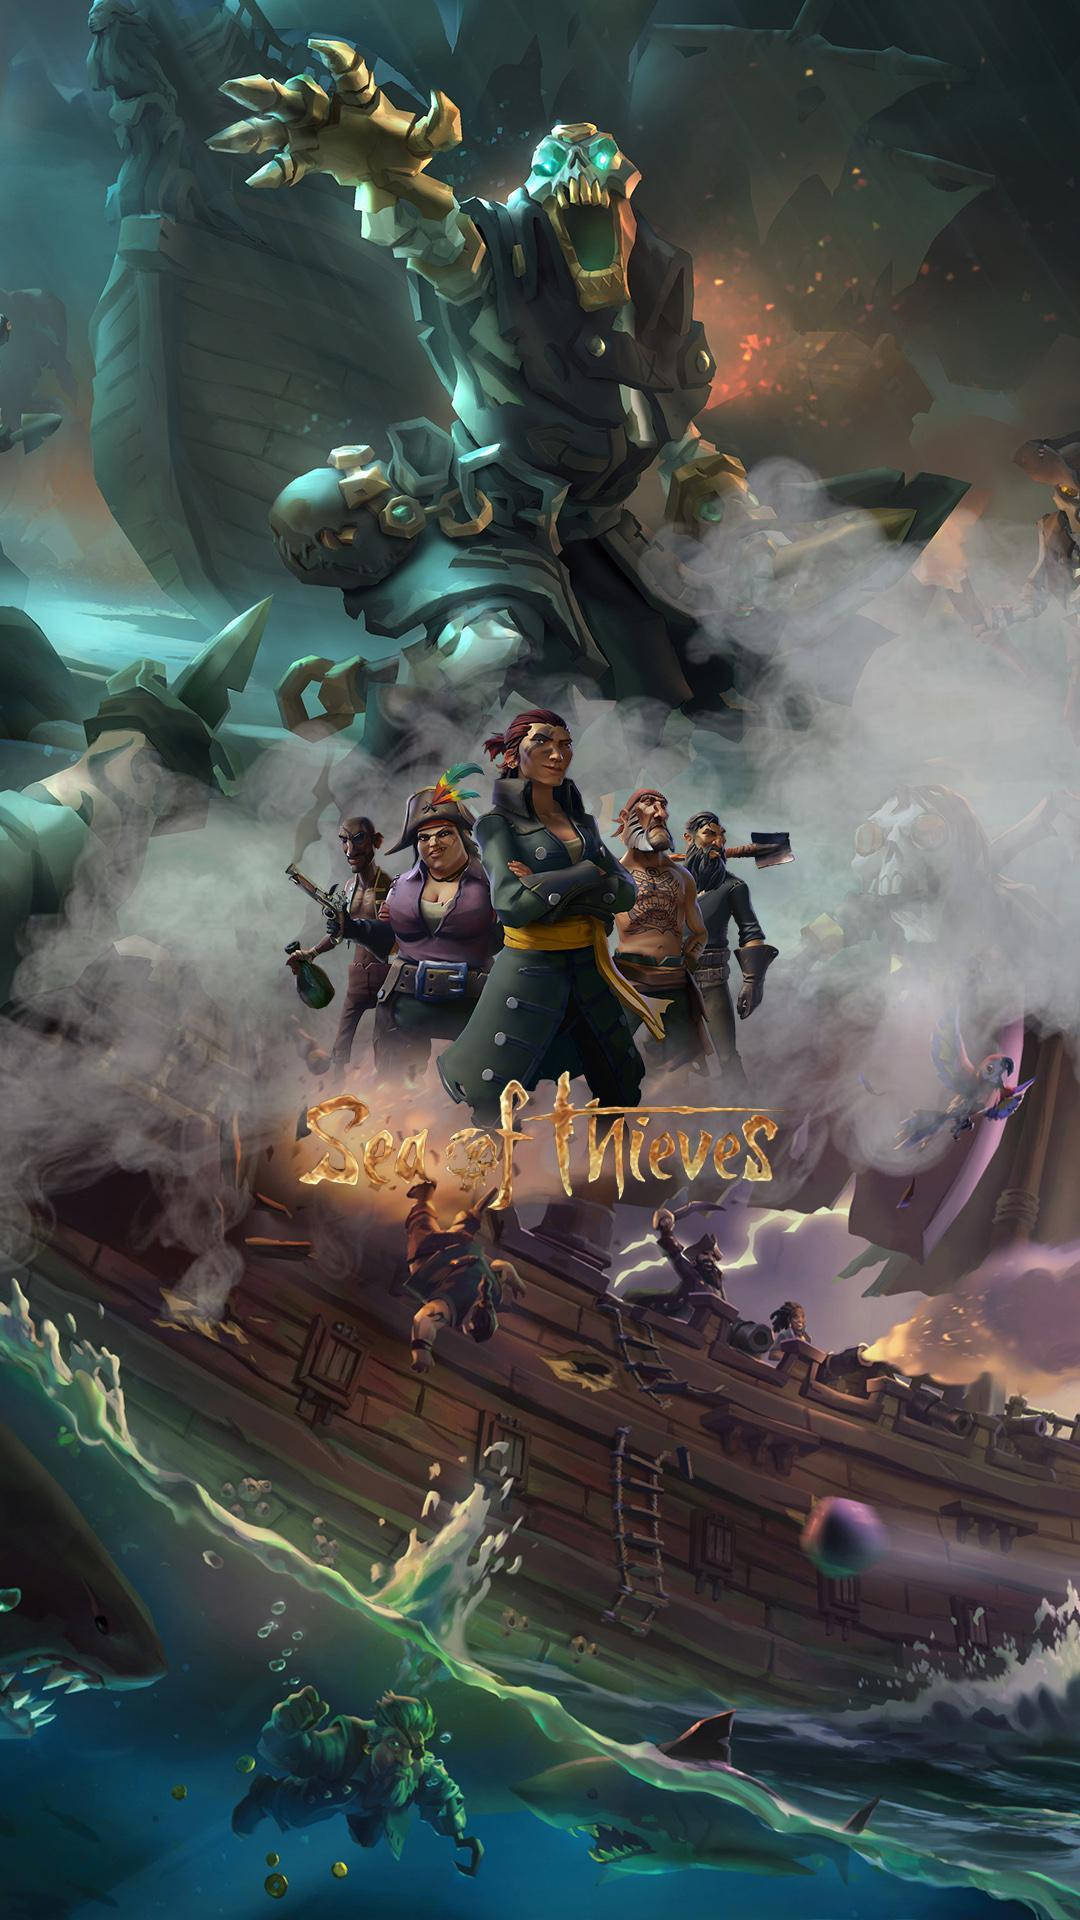 Seaof Thieves Gaming Handy Wallpaper